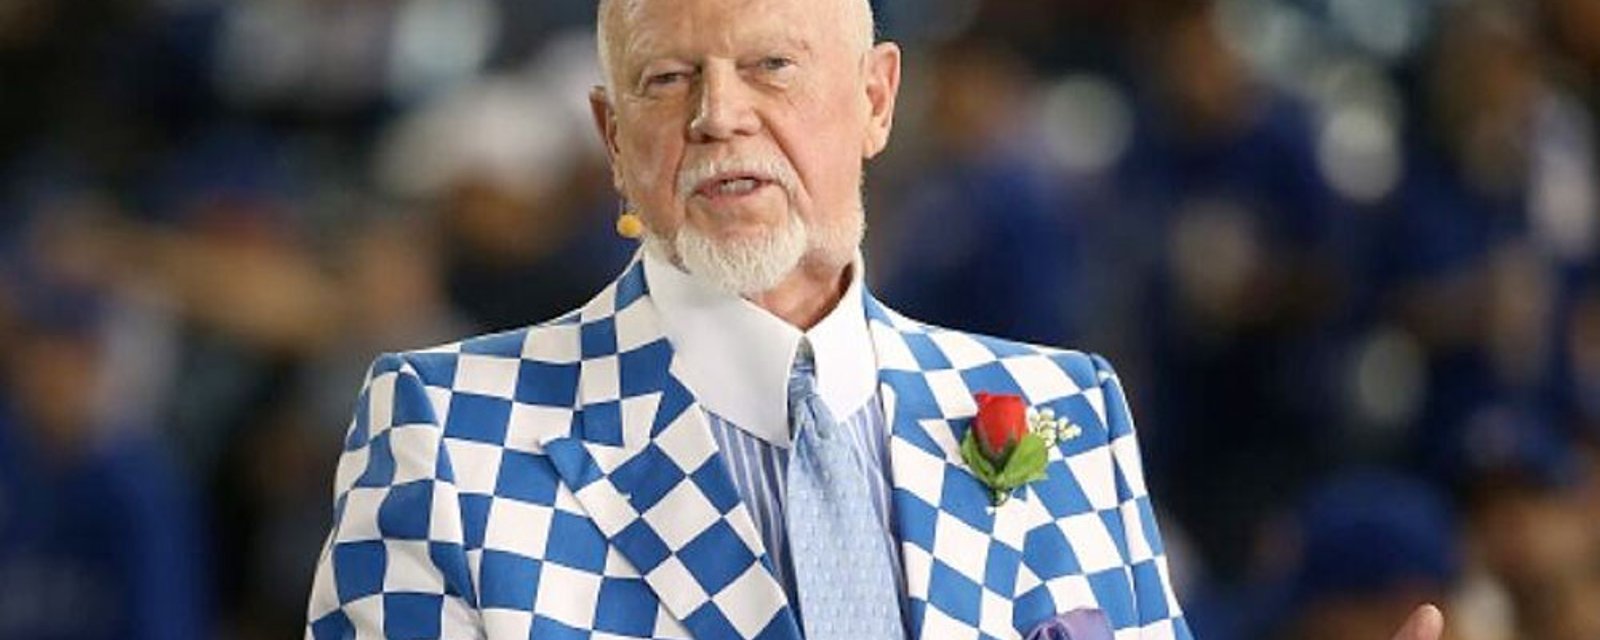 Don Cherry is officially out at CBC and Sportsnet